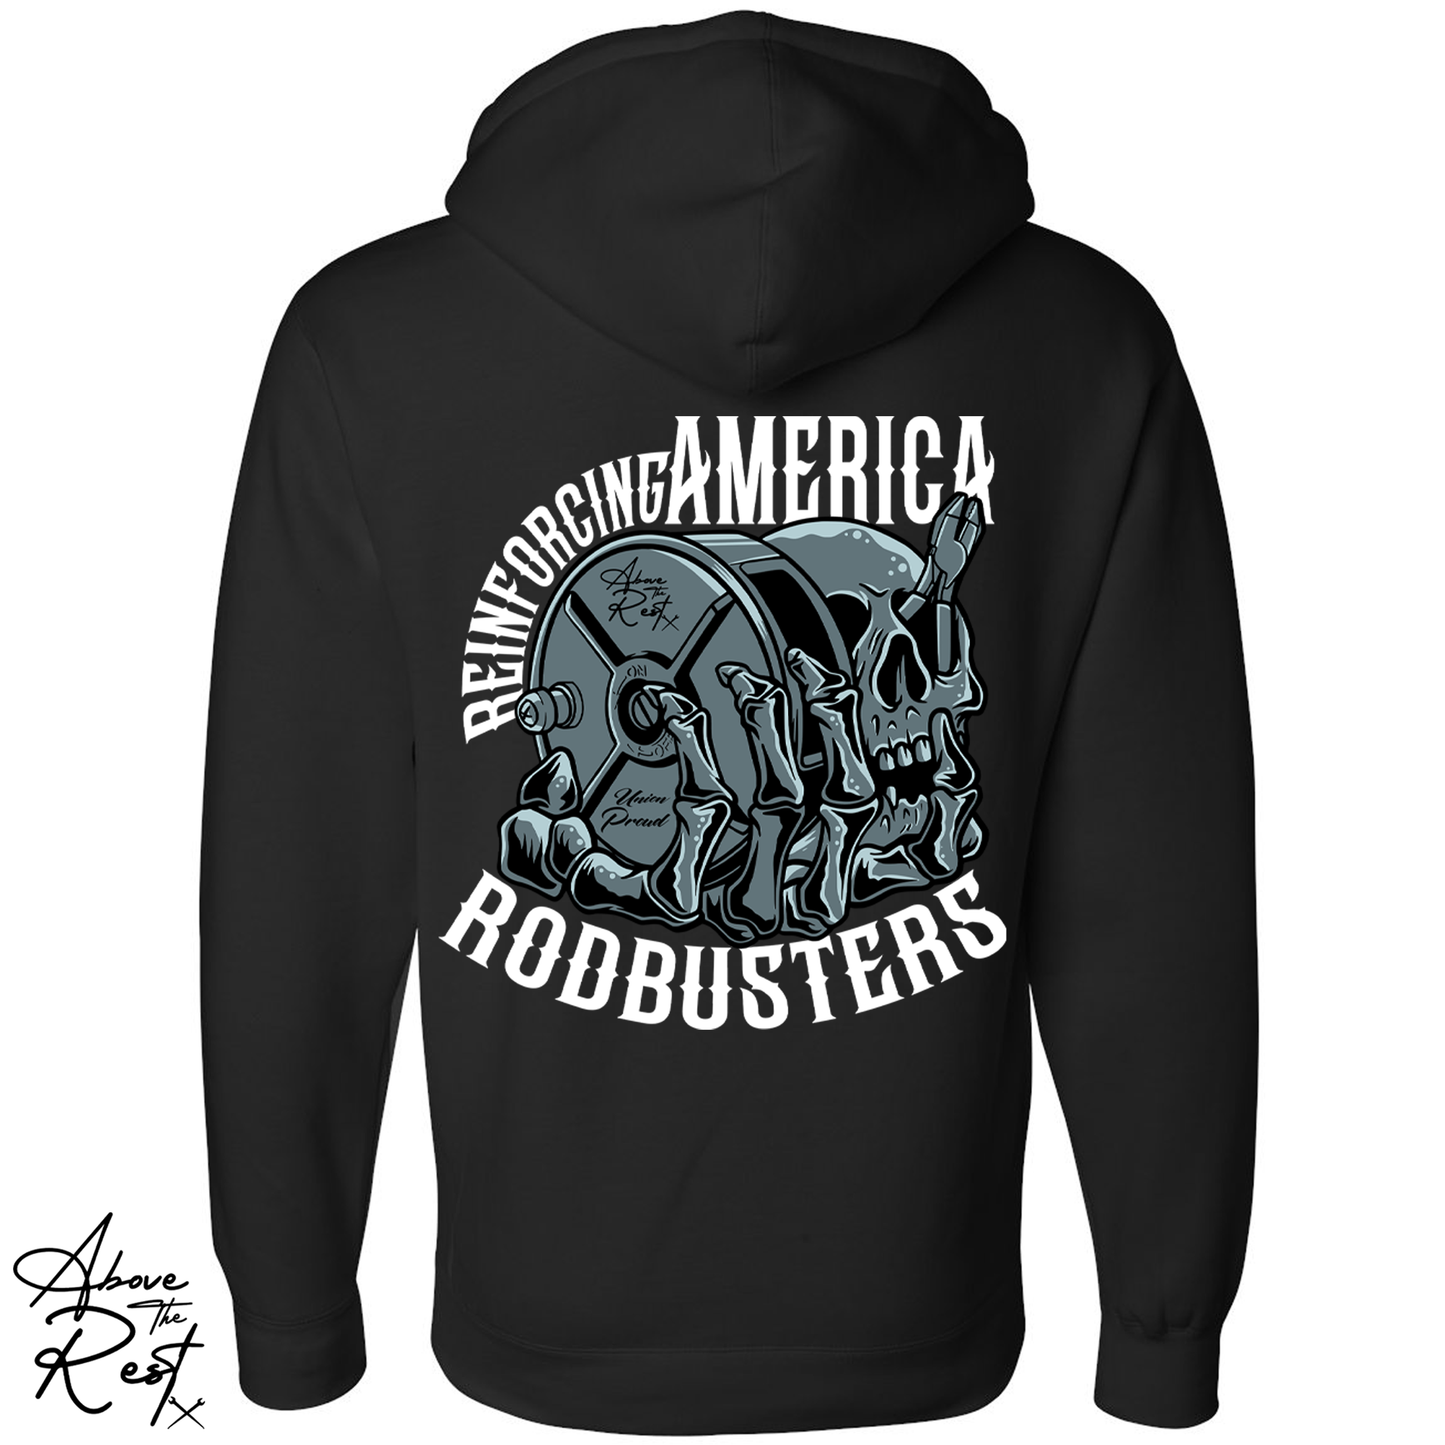 REINFORCING AMERICA RODBUSTERS PULLOVER HOODIE